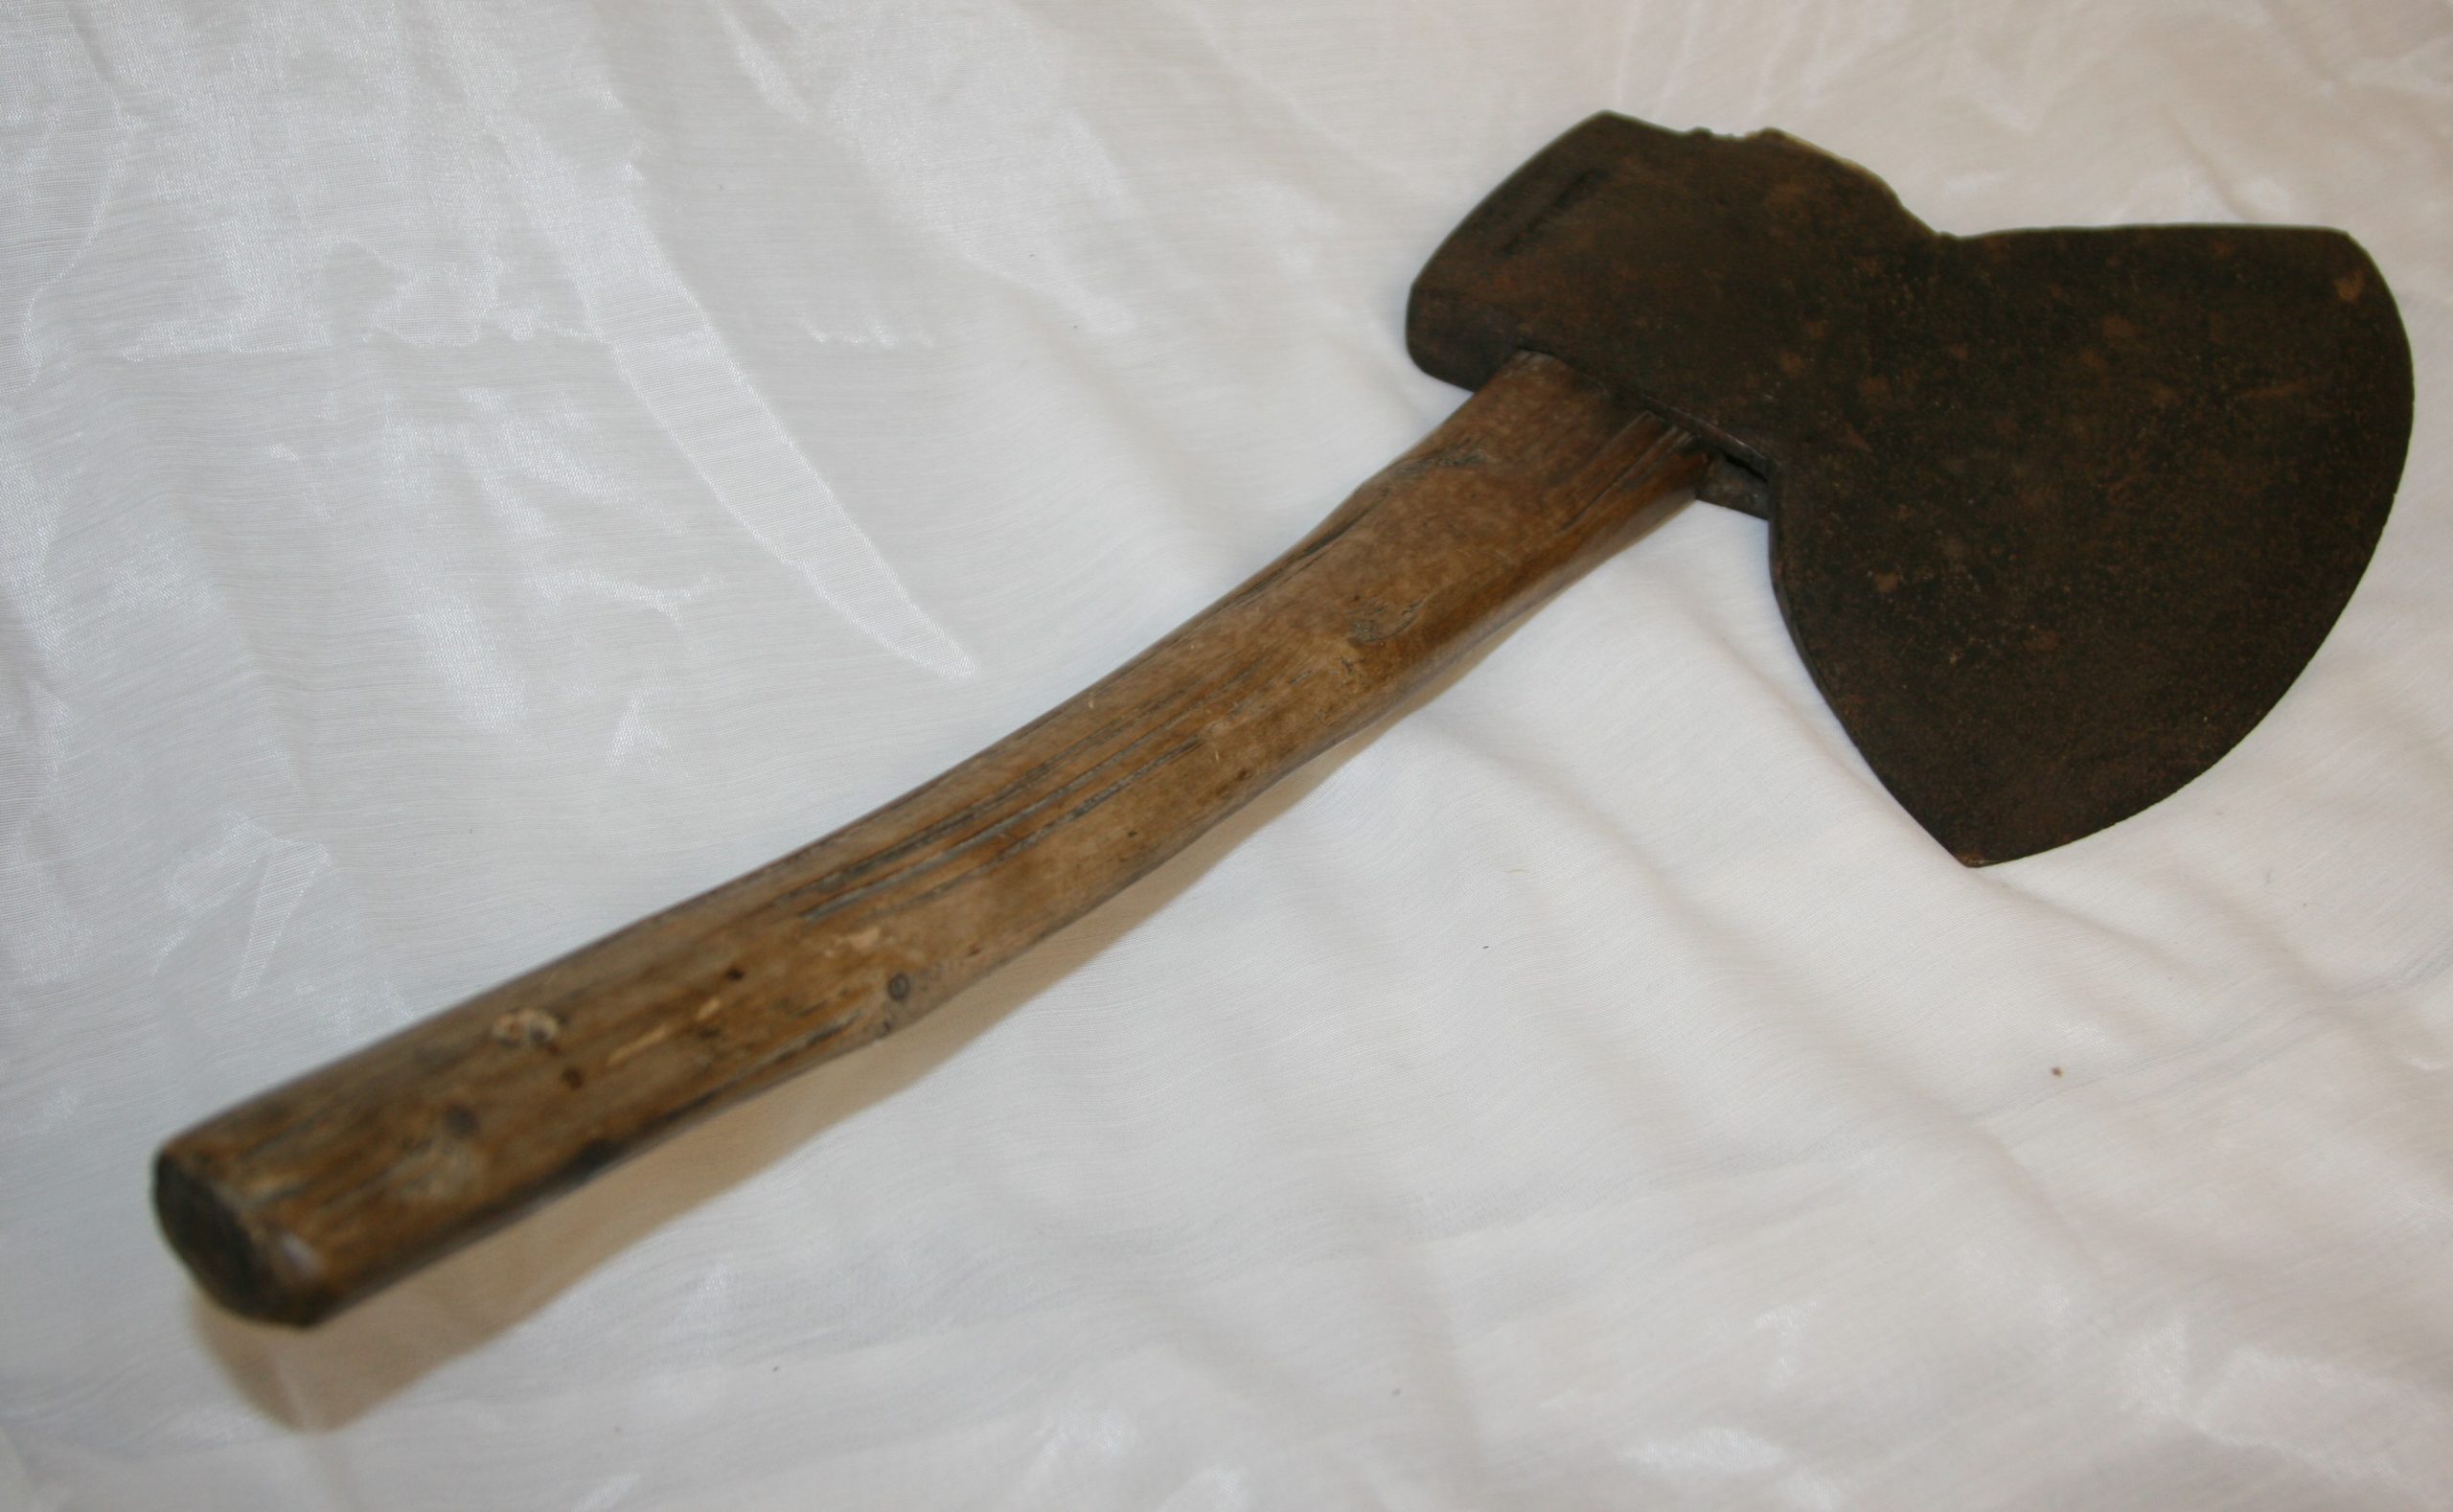 The broad-axe made by Samuel Lount. The axe bears the word 